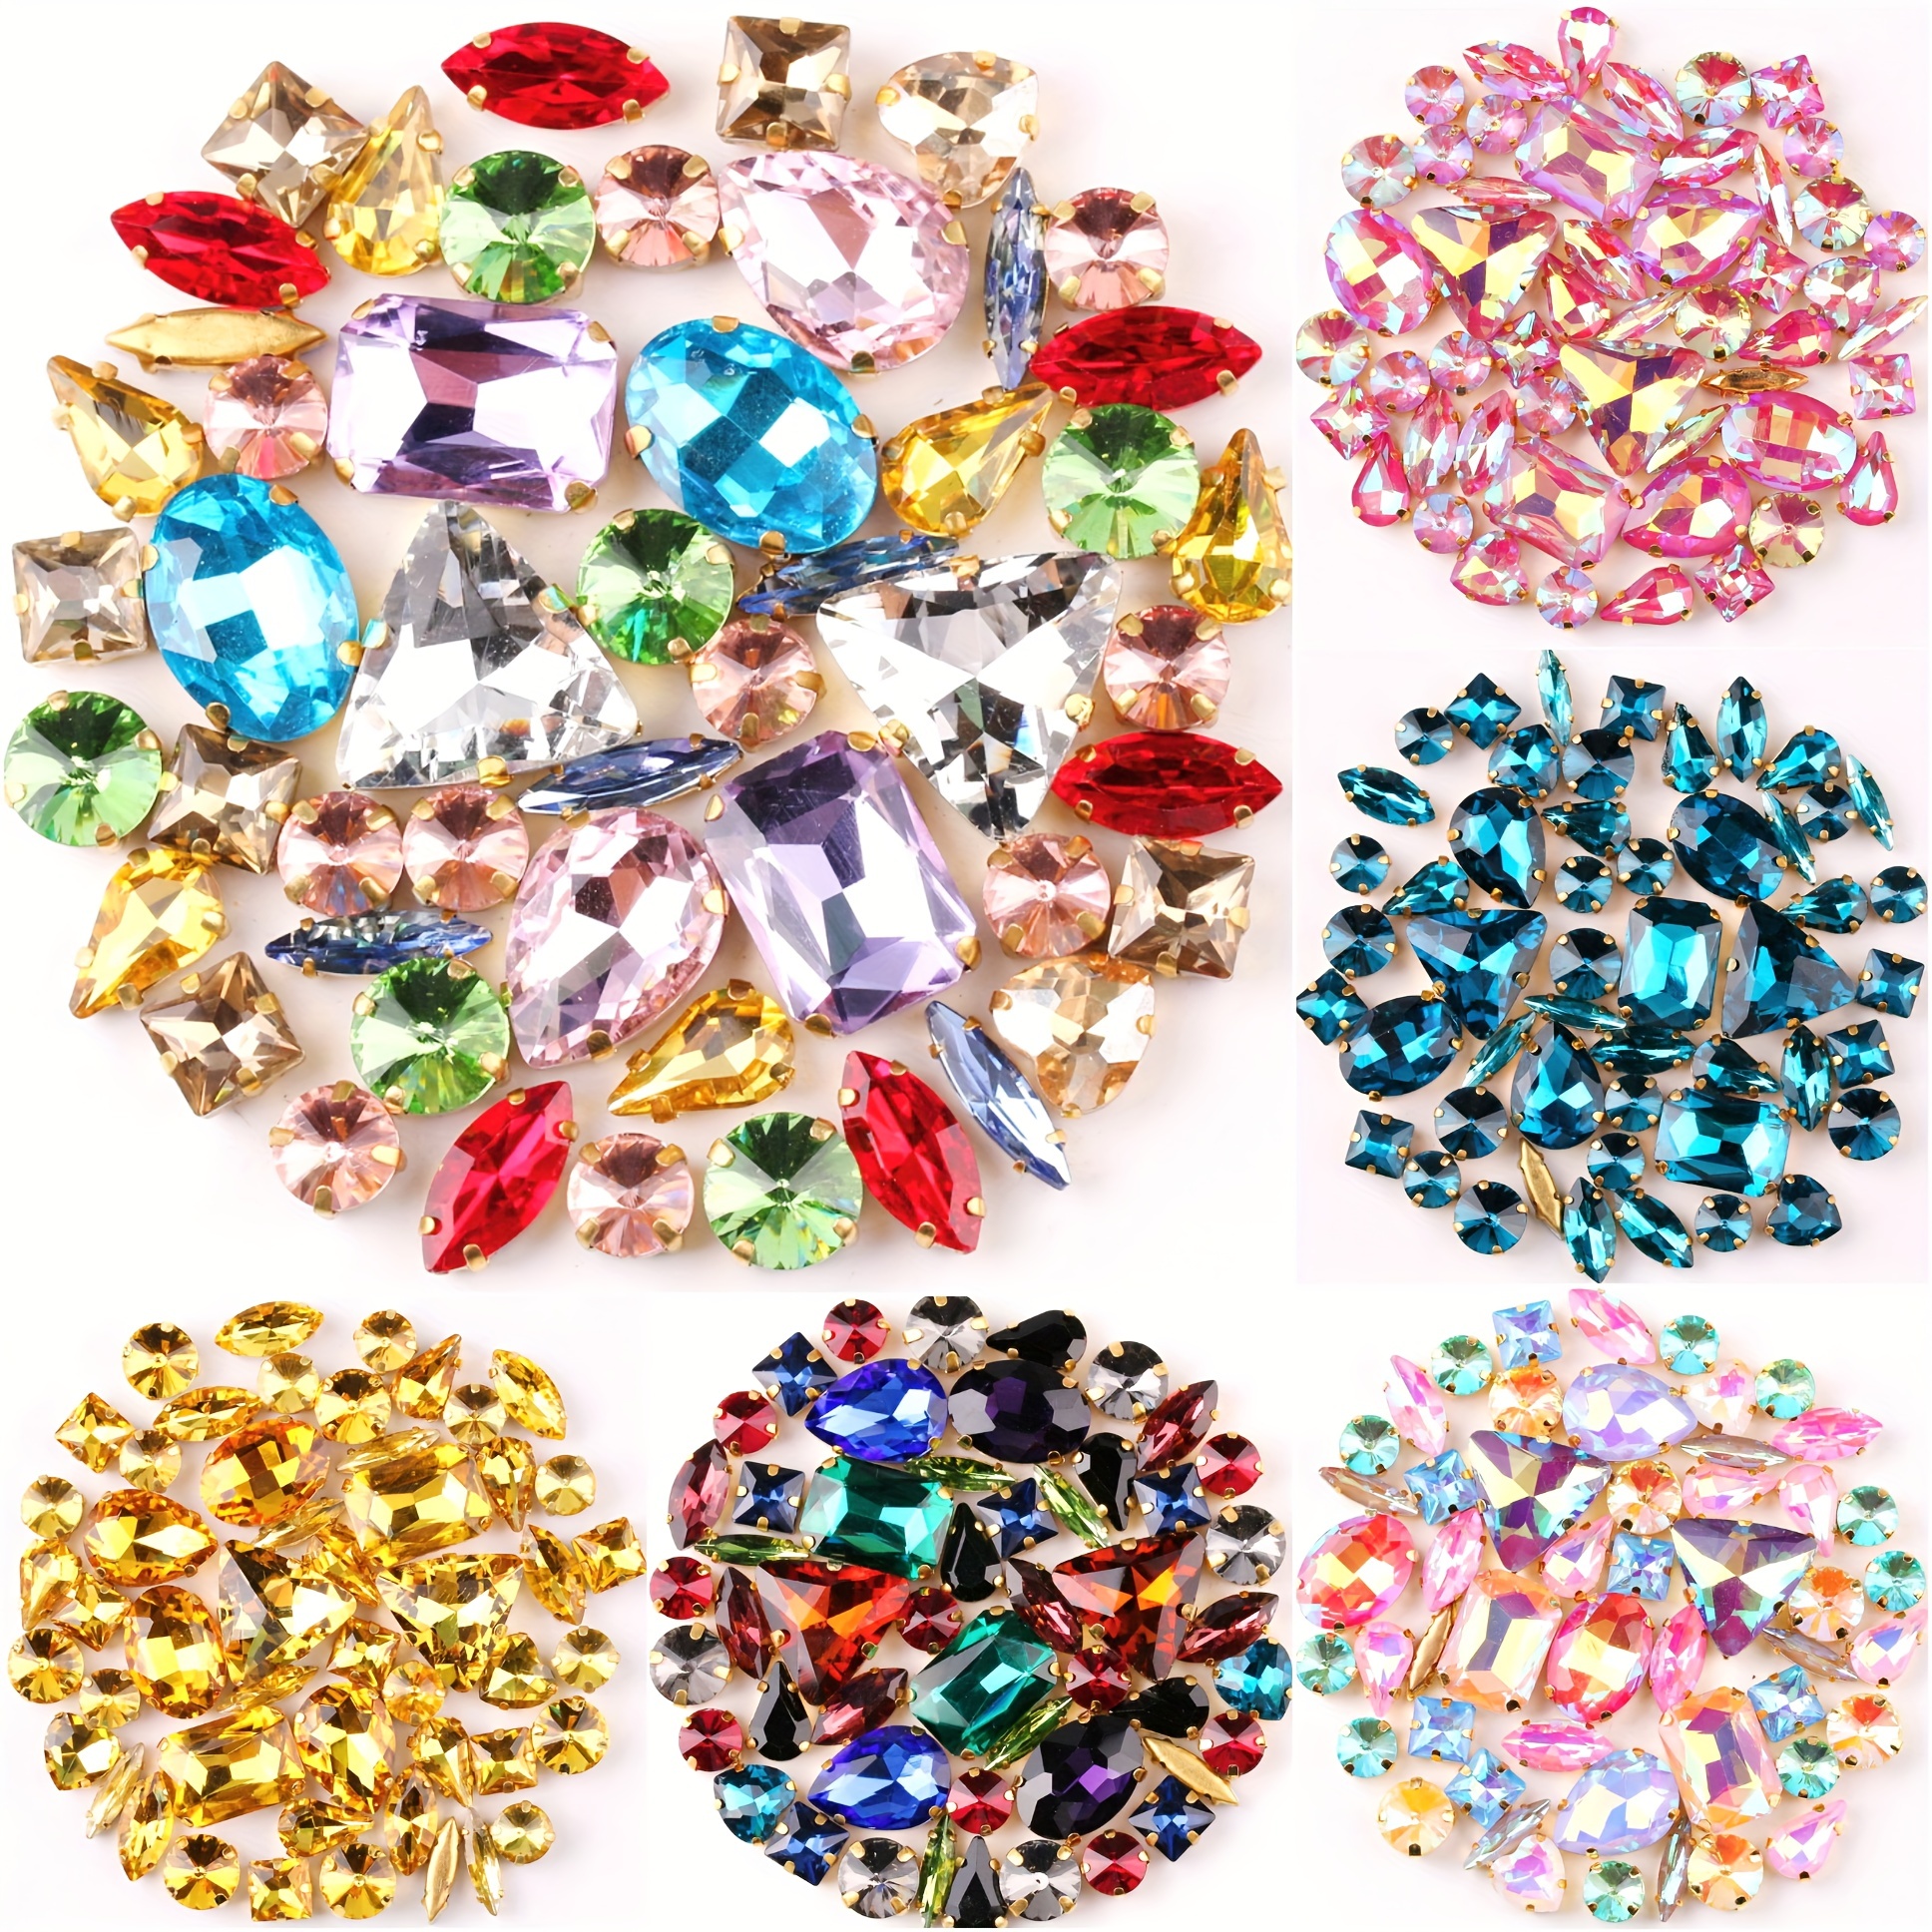 3mm-8mm Claw Cup Crystals Strass Flatback Round Stones Non Hotfix